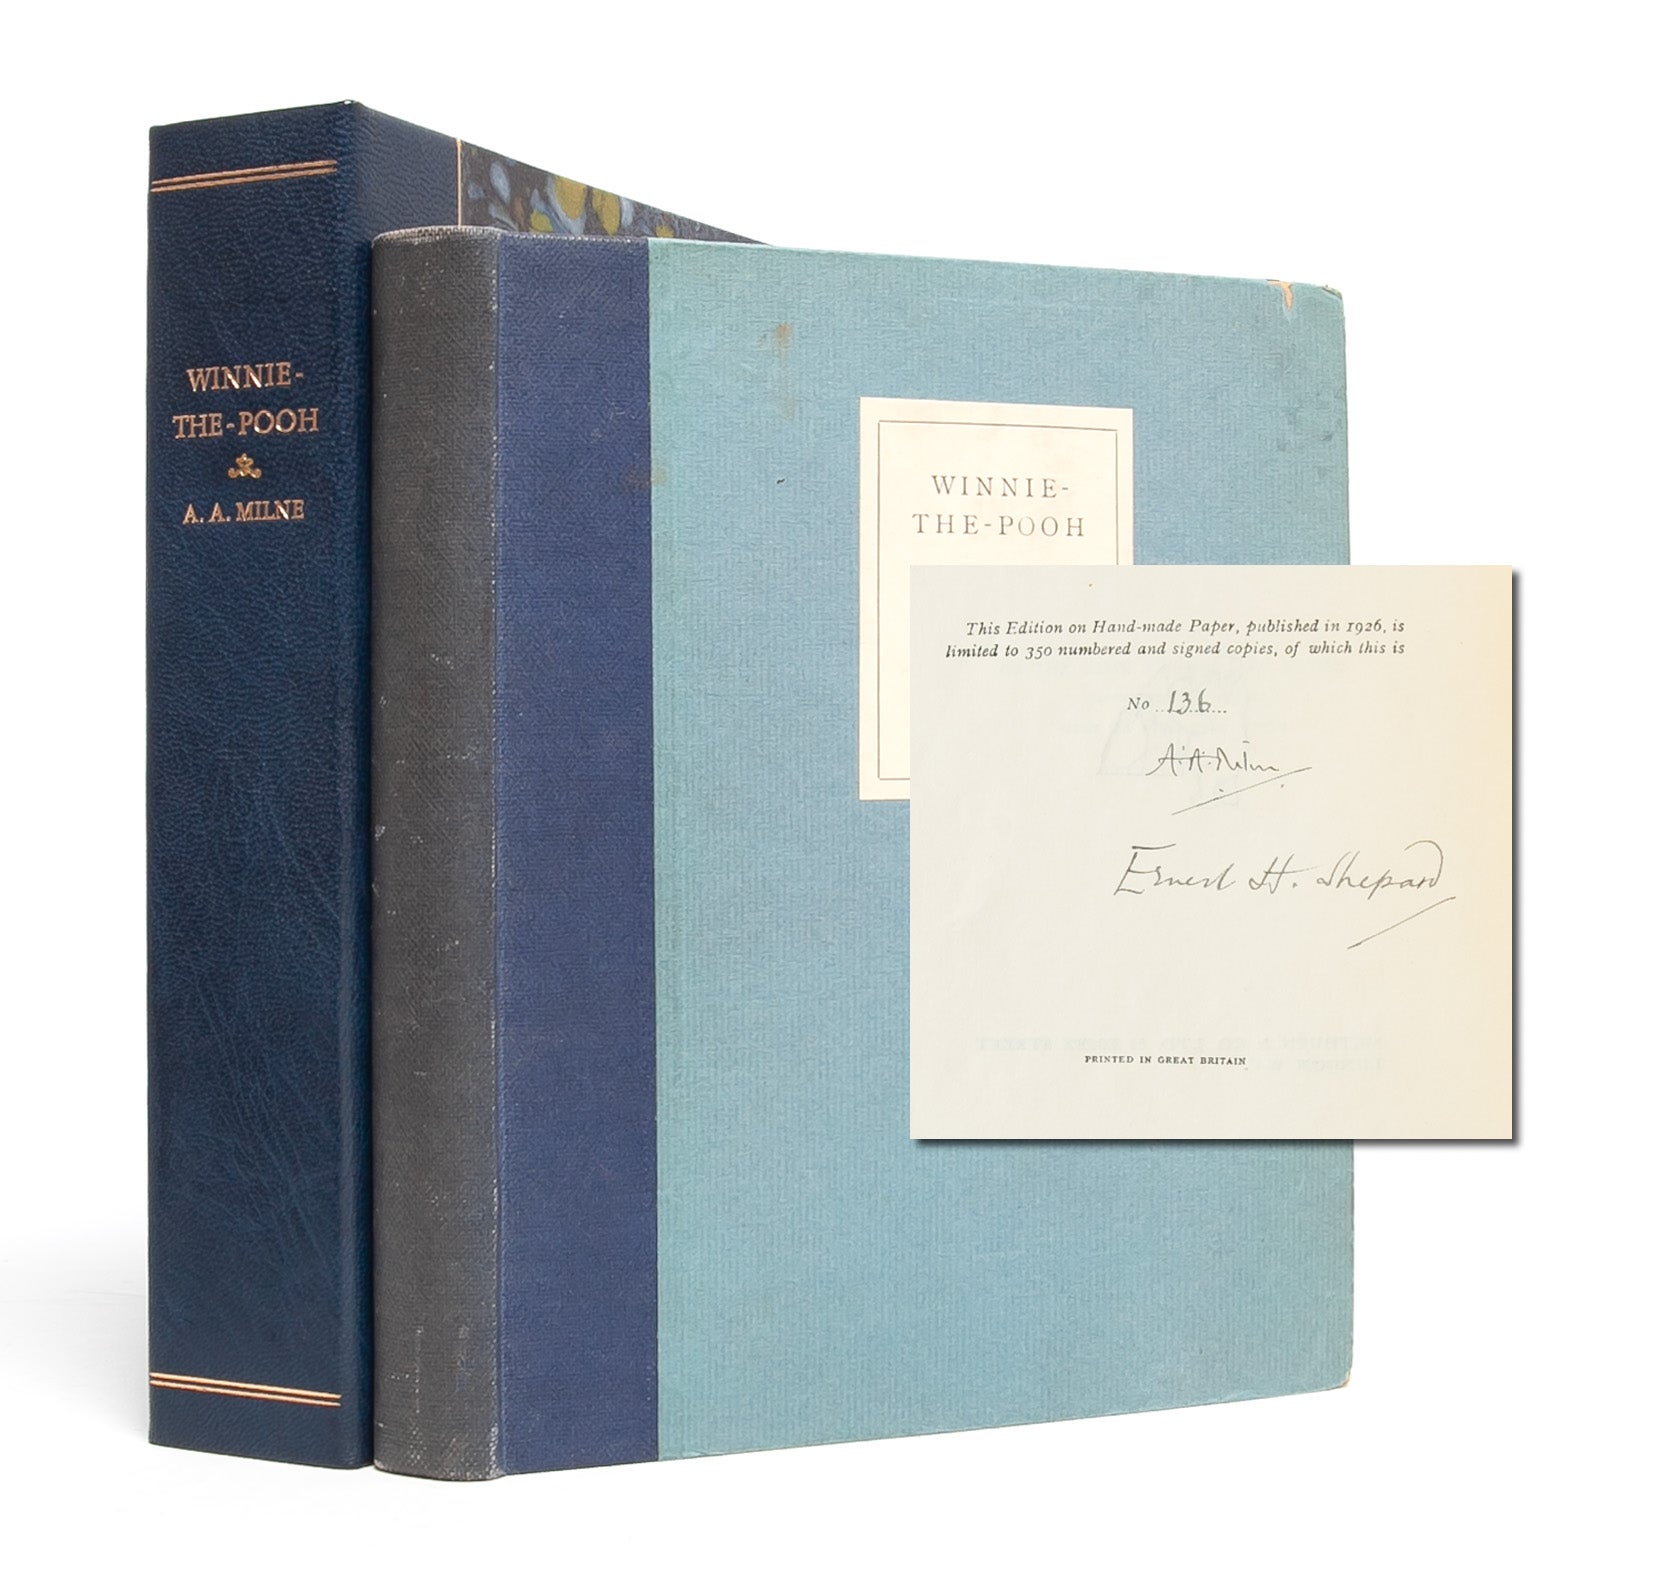 (Item #5889) Winnie-the-Pooh (Signed limited edition). A. A. Milne, E. H. Shepard.